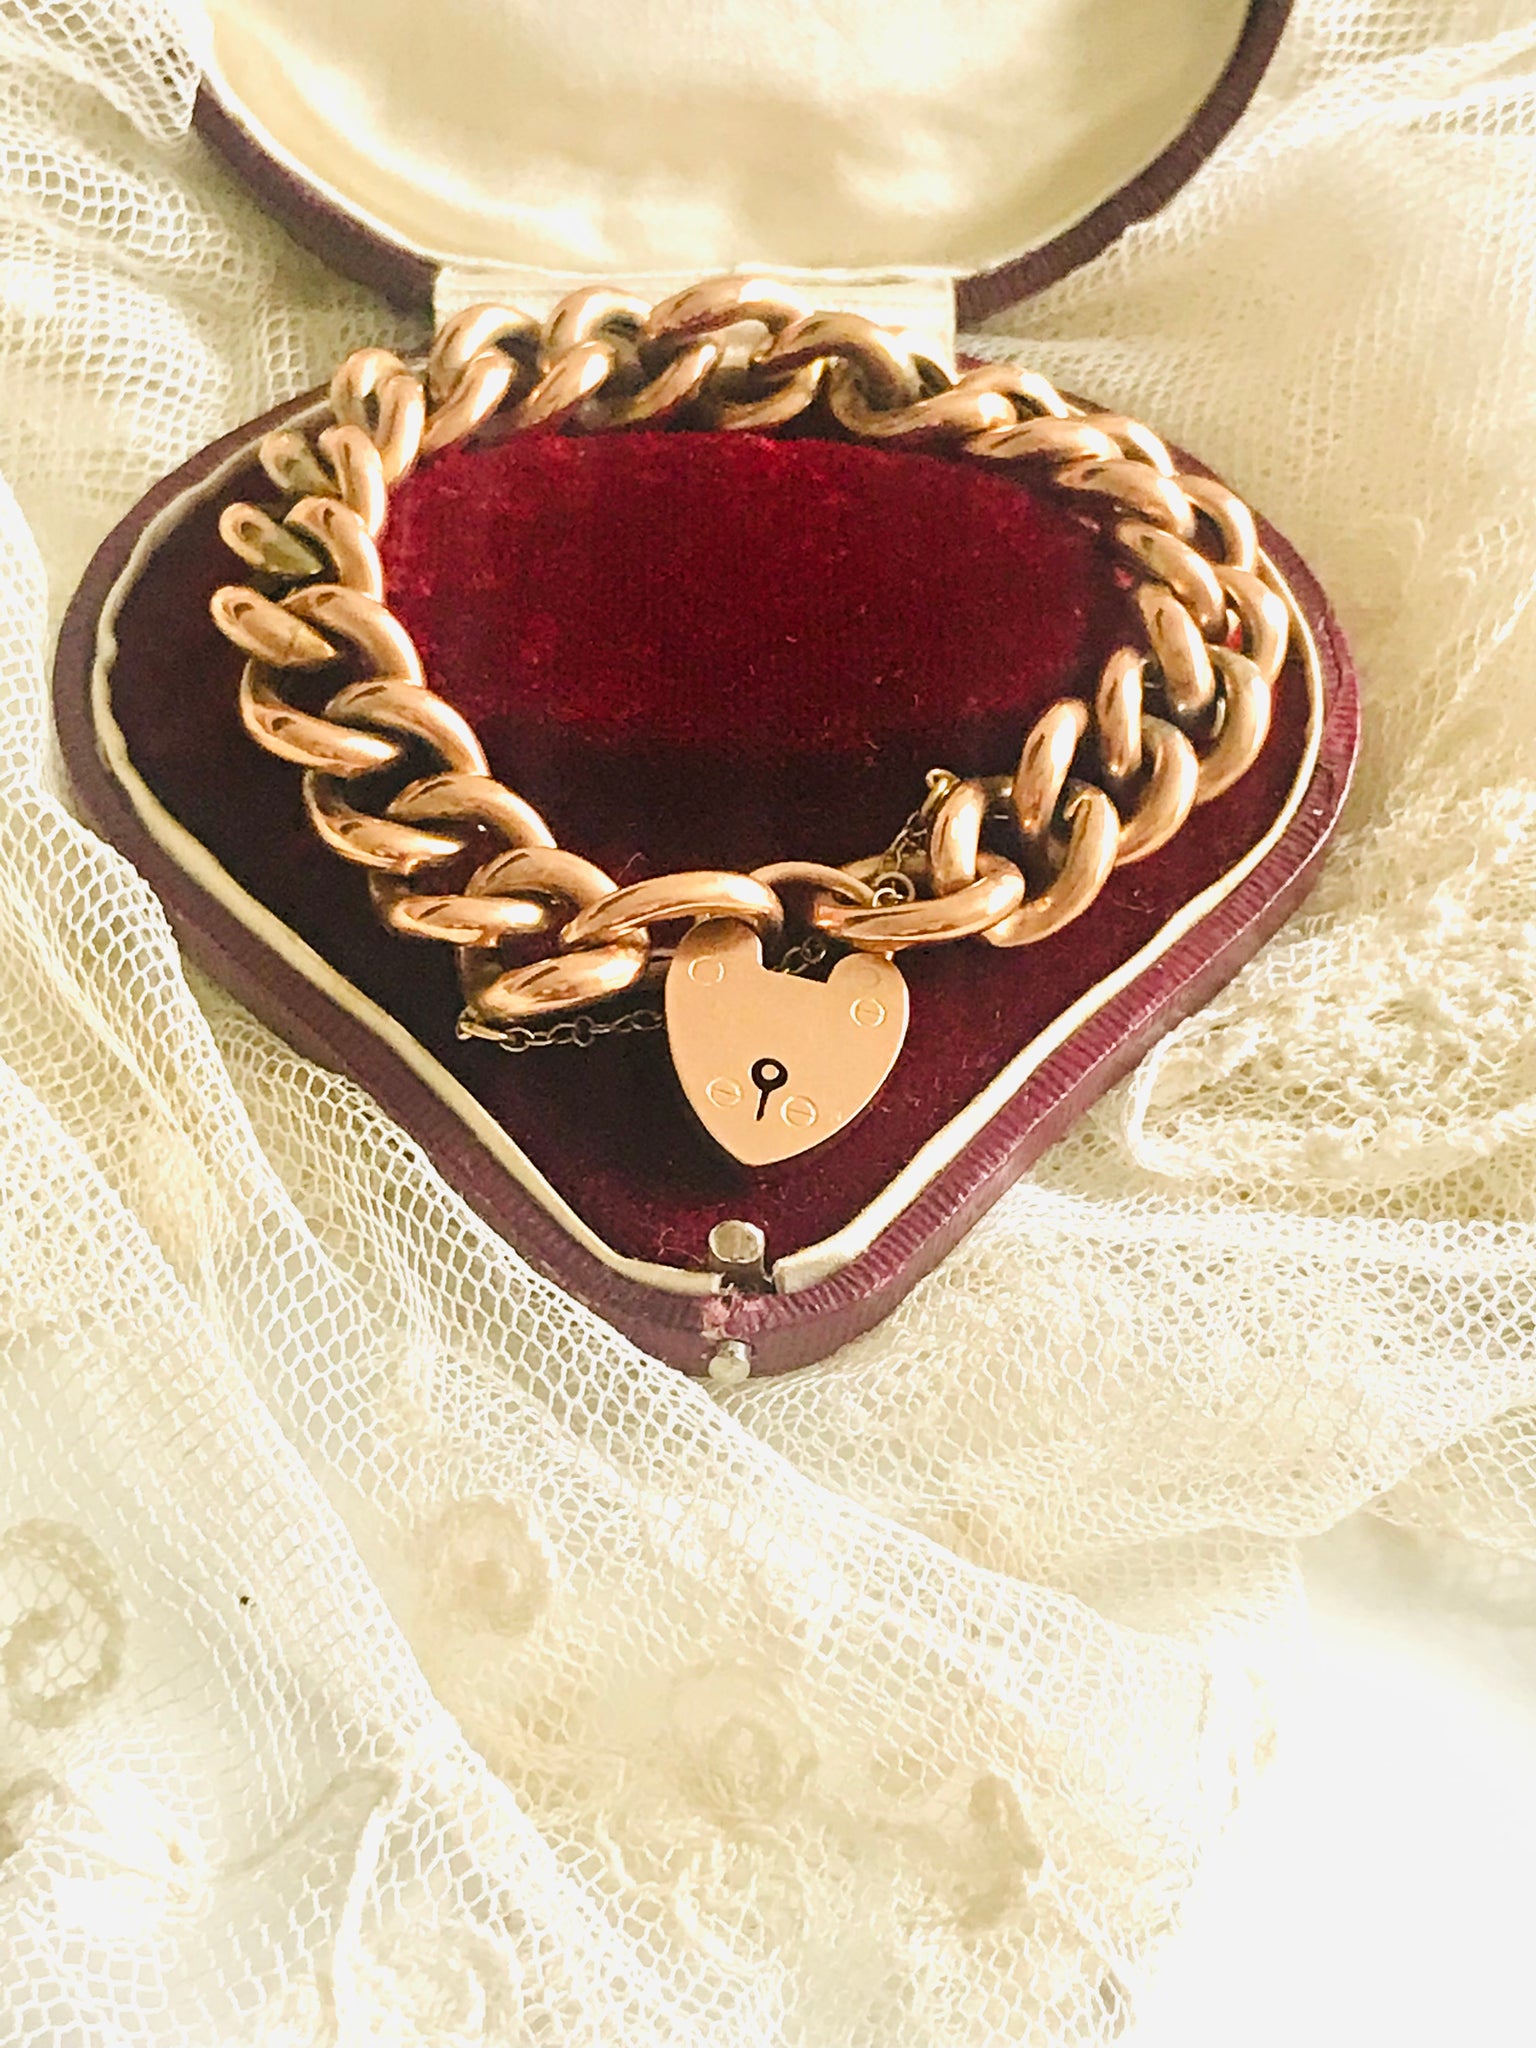 Antique 9ct Gold Curb Link Bracelet in original fitted red heart shaped box